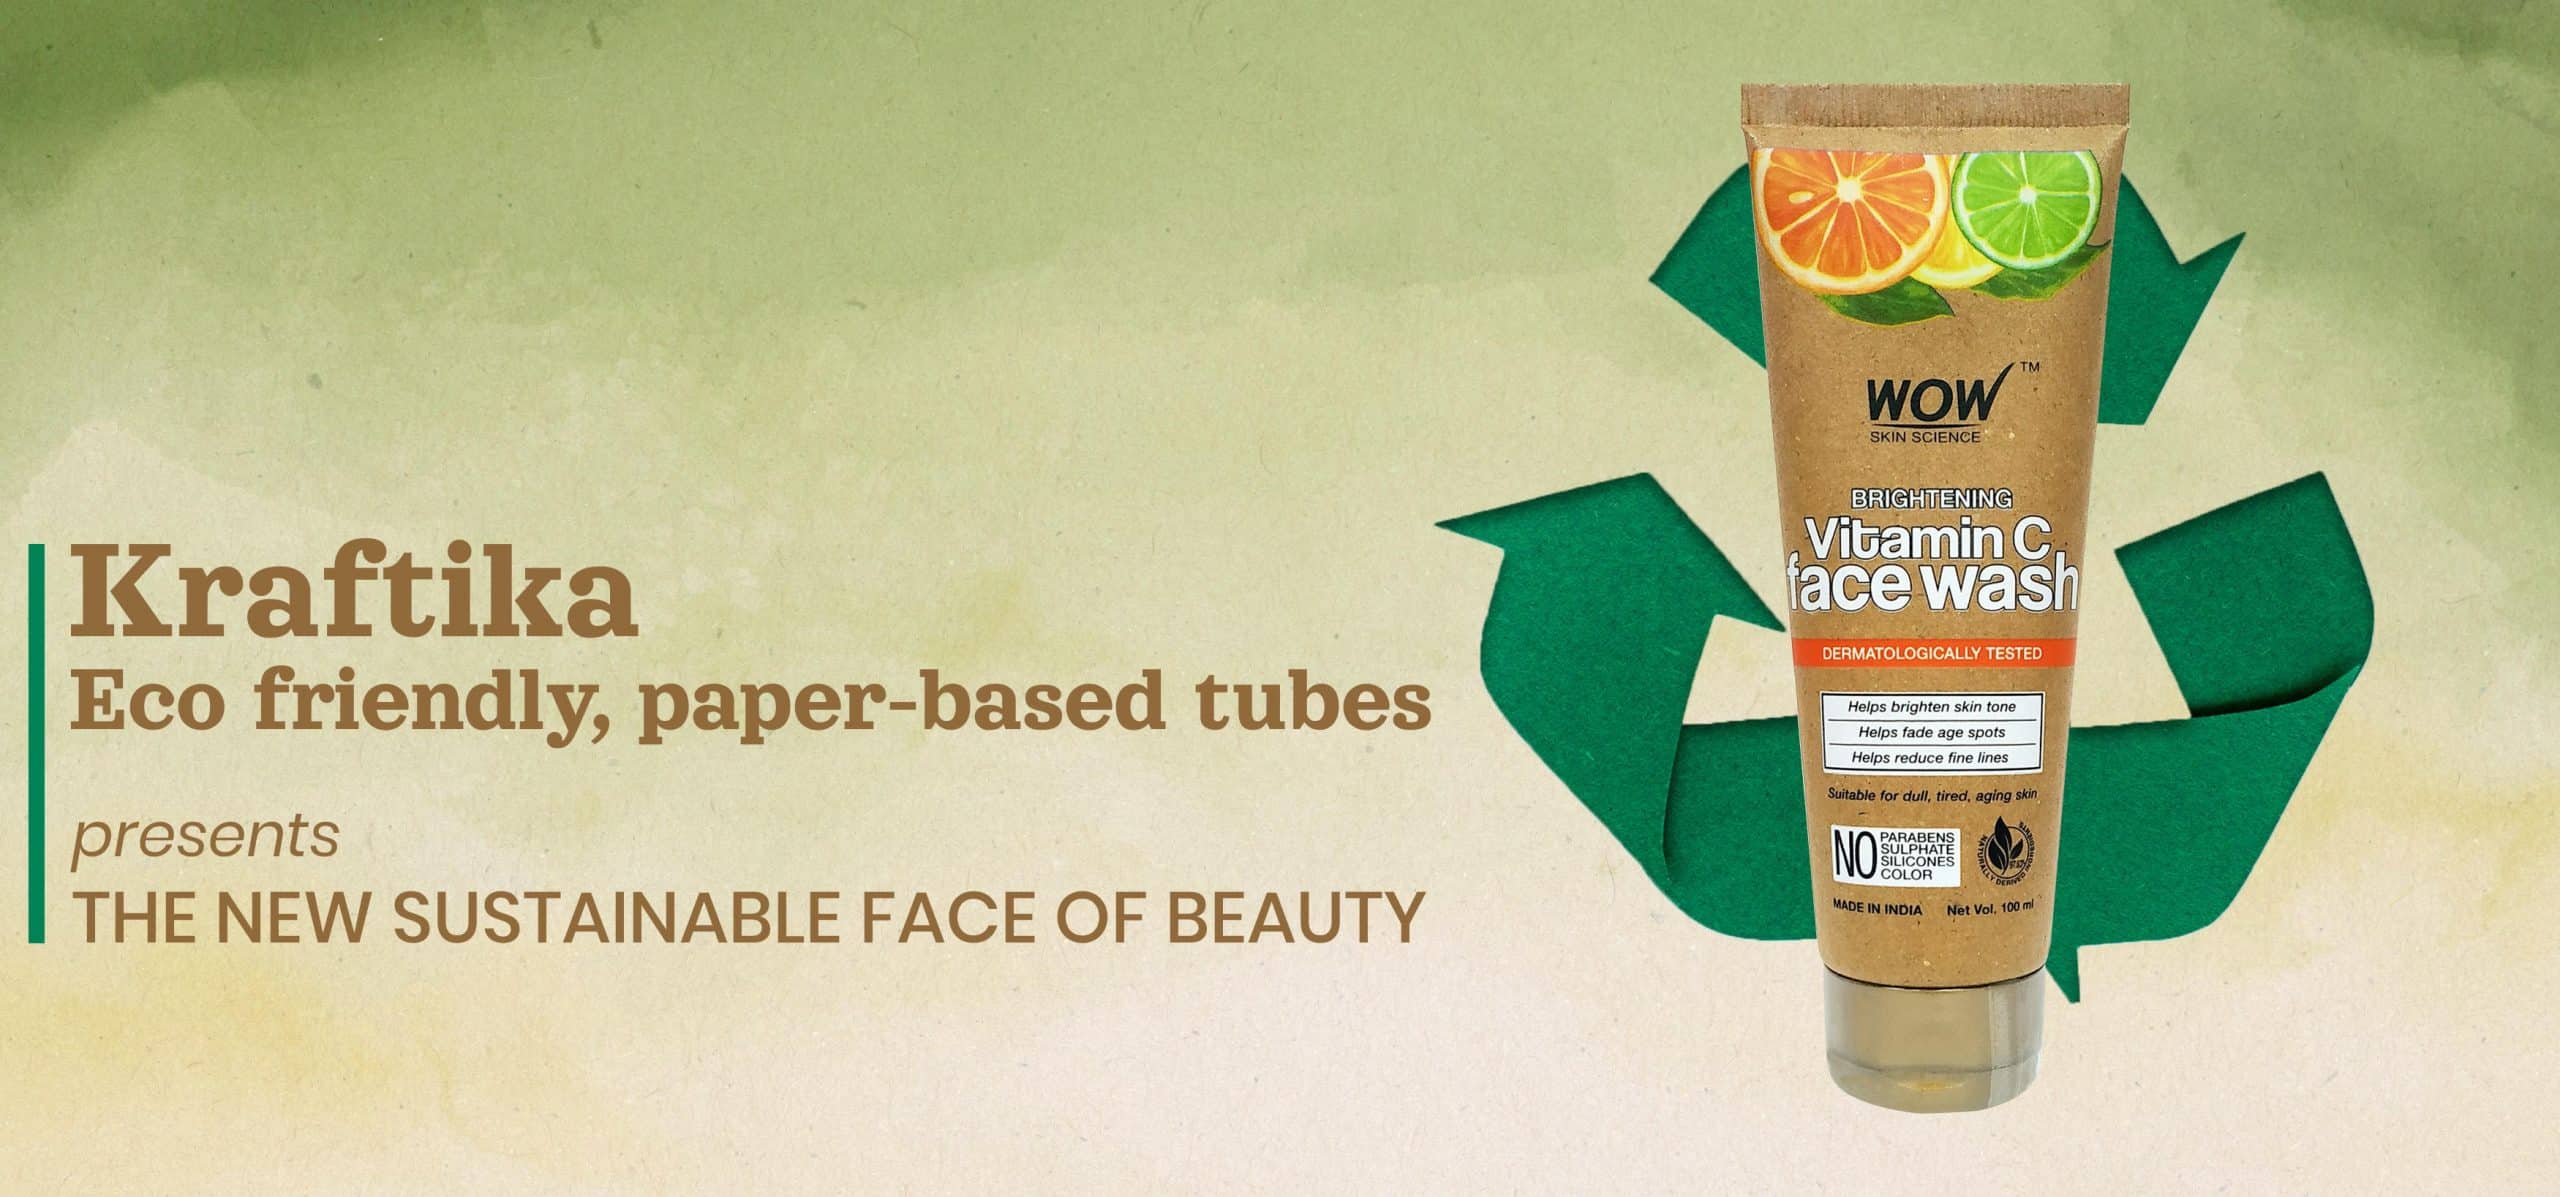 KRAFTIKA: Crafting a Sustainable Experience With Paper-Based Tubes